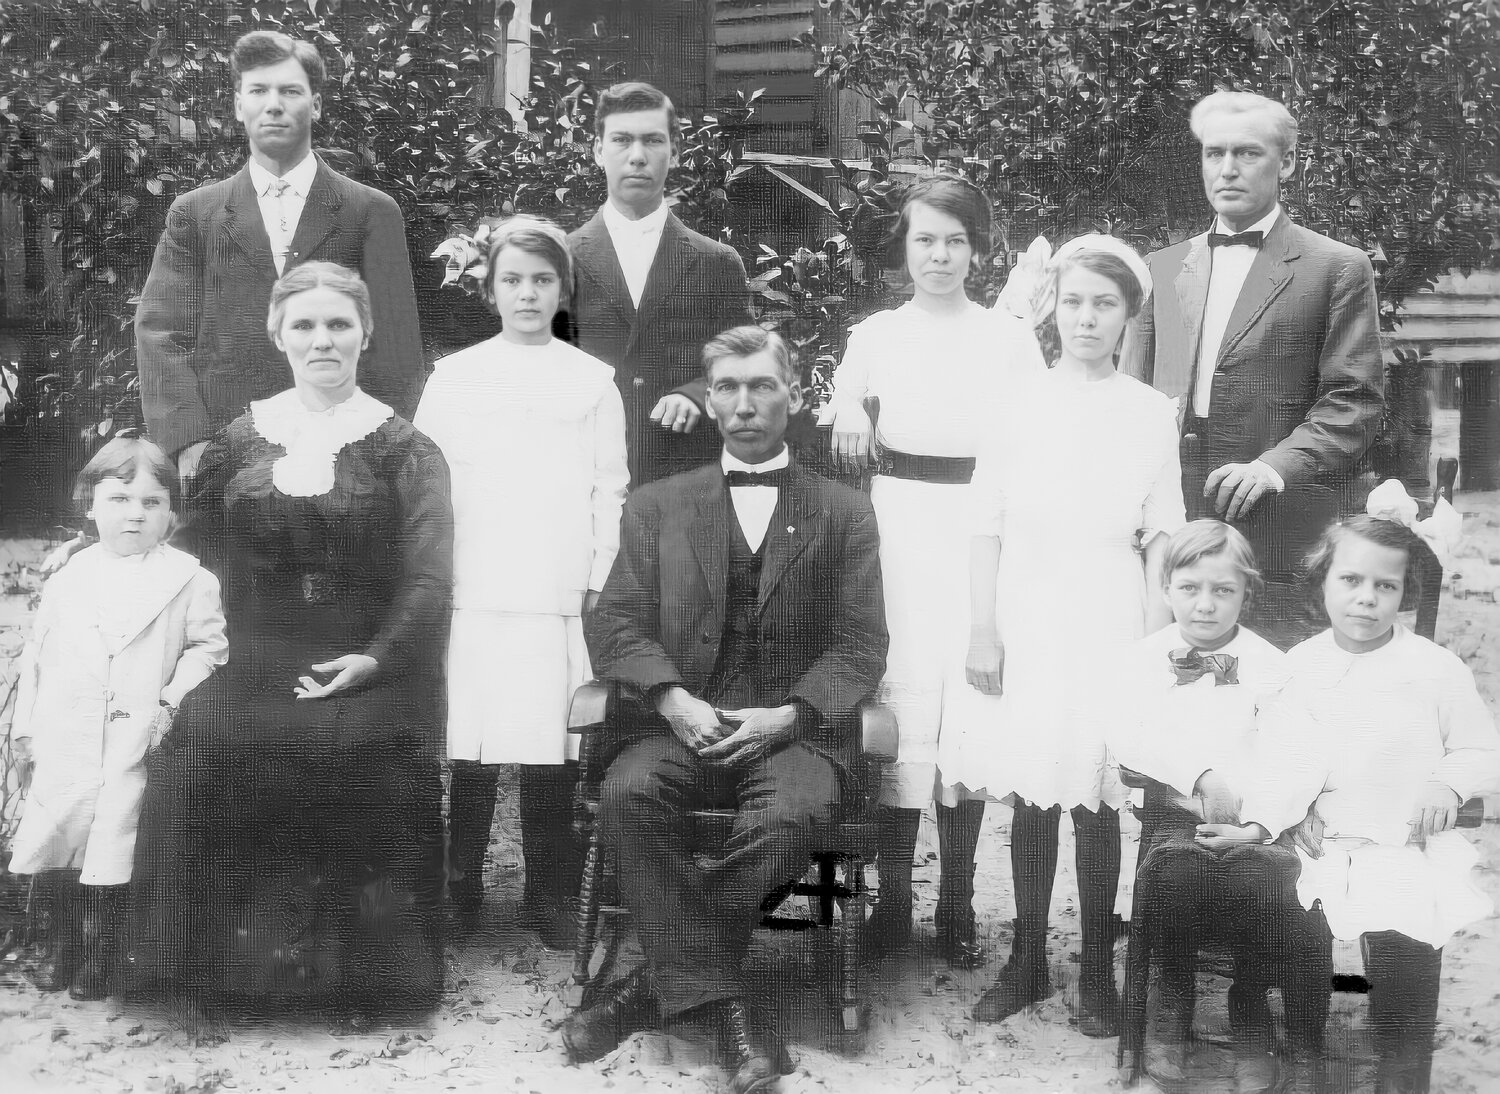 The family of John Y. & Ella Saunders Beach from 1913.